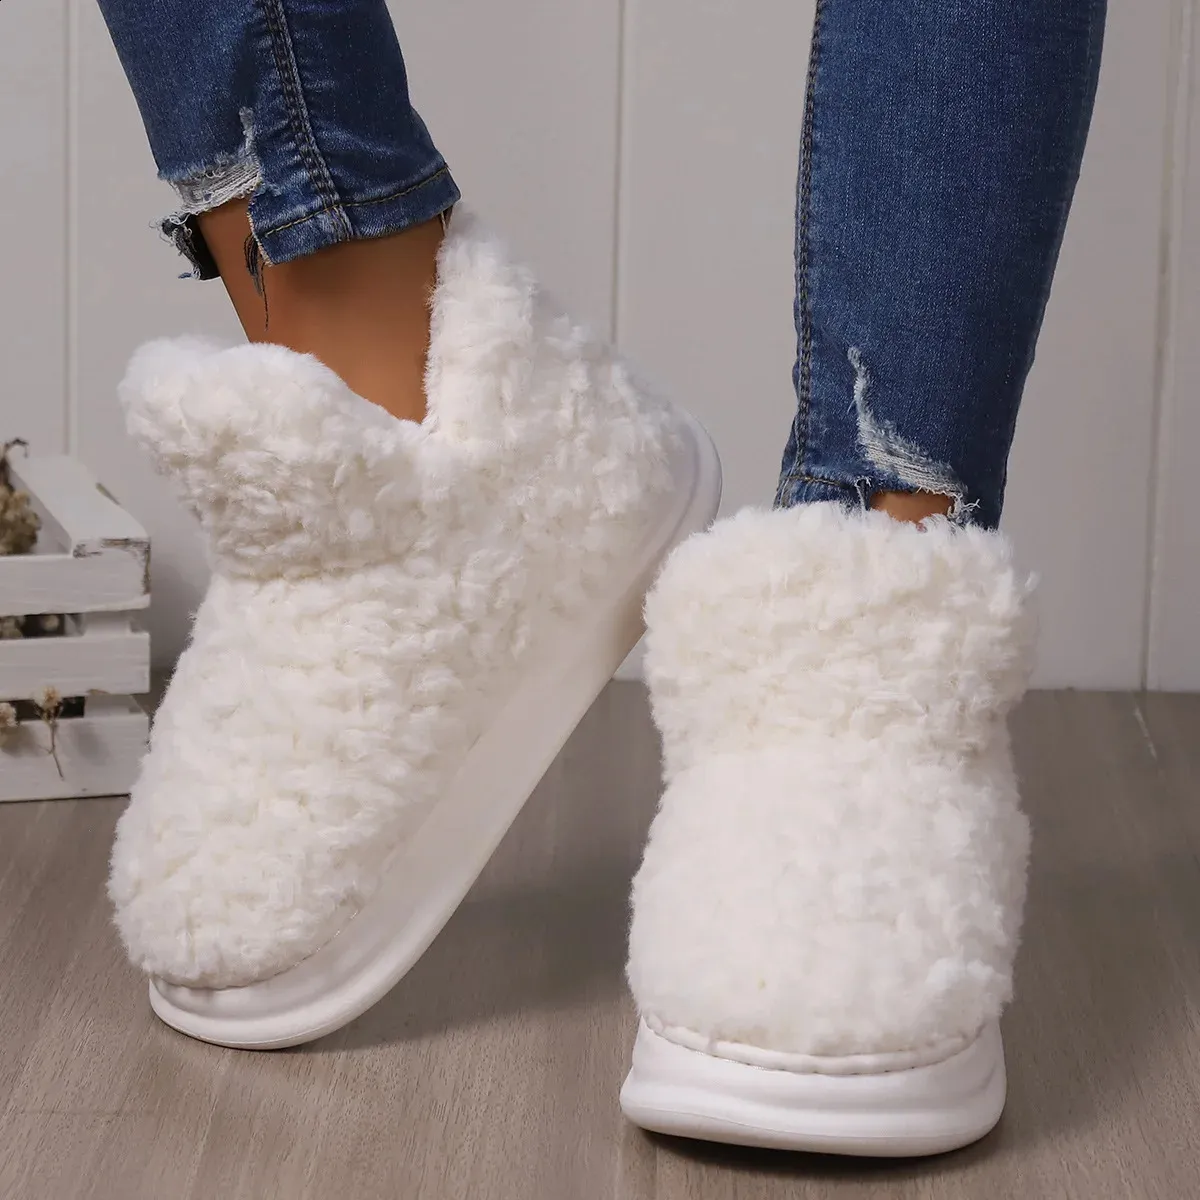 Slippers Women Warm Fur Slippers Couples Winter Platform Shoes Soft Plush Thick Sole Girls Boys Indoor Street Snow Boots Fluffy Footwear 231109